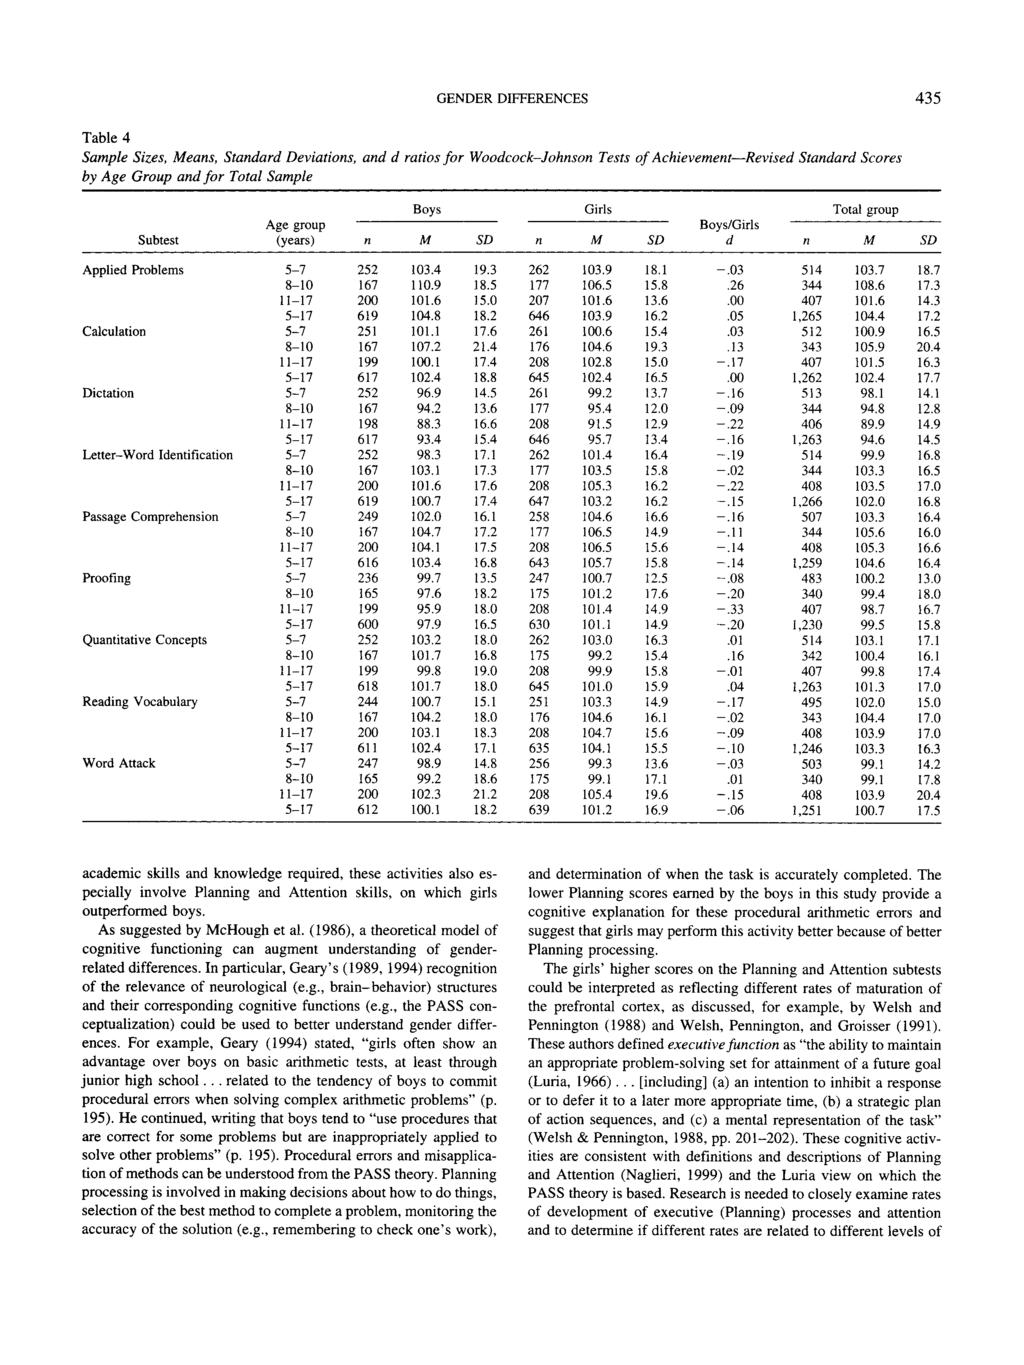 GENDER DIFFERENCES 435 Table 4 Sample Sizes, eas, Stadard Deviatios, ad d ratios for Woodcock-Johso Tests of Achievemet Revised Stadard Scores by Age Group ad for Total Sample Subtest Age group